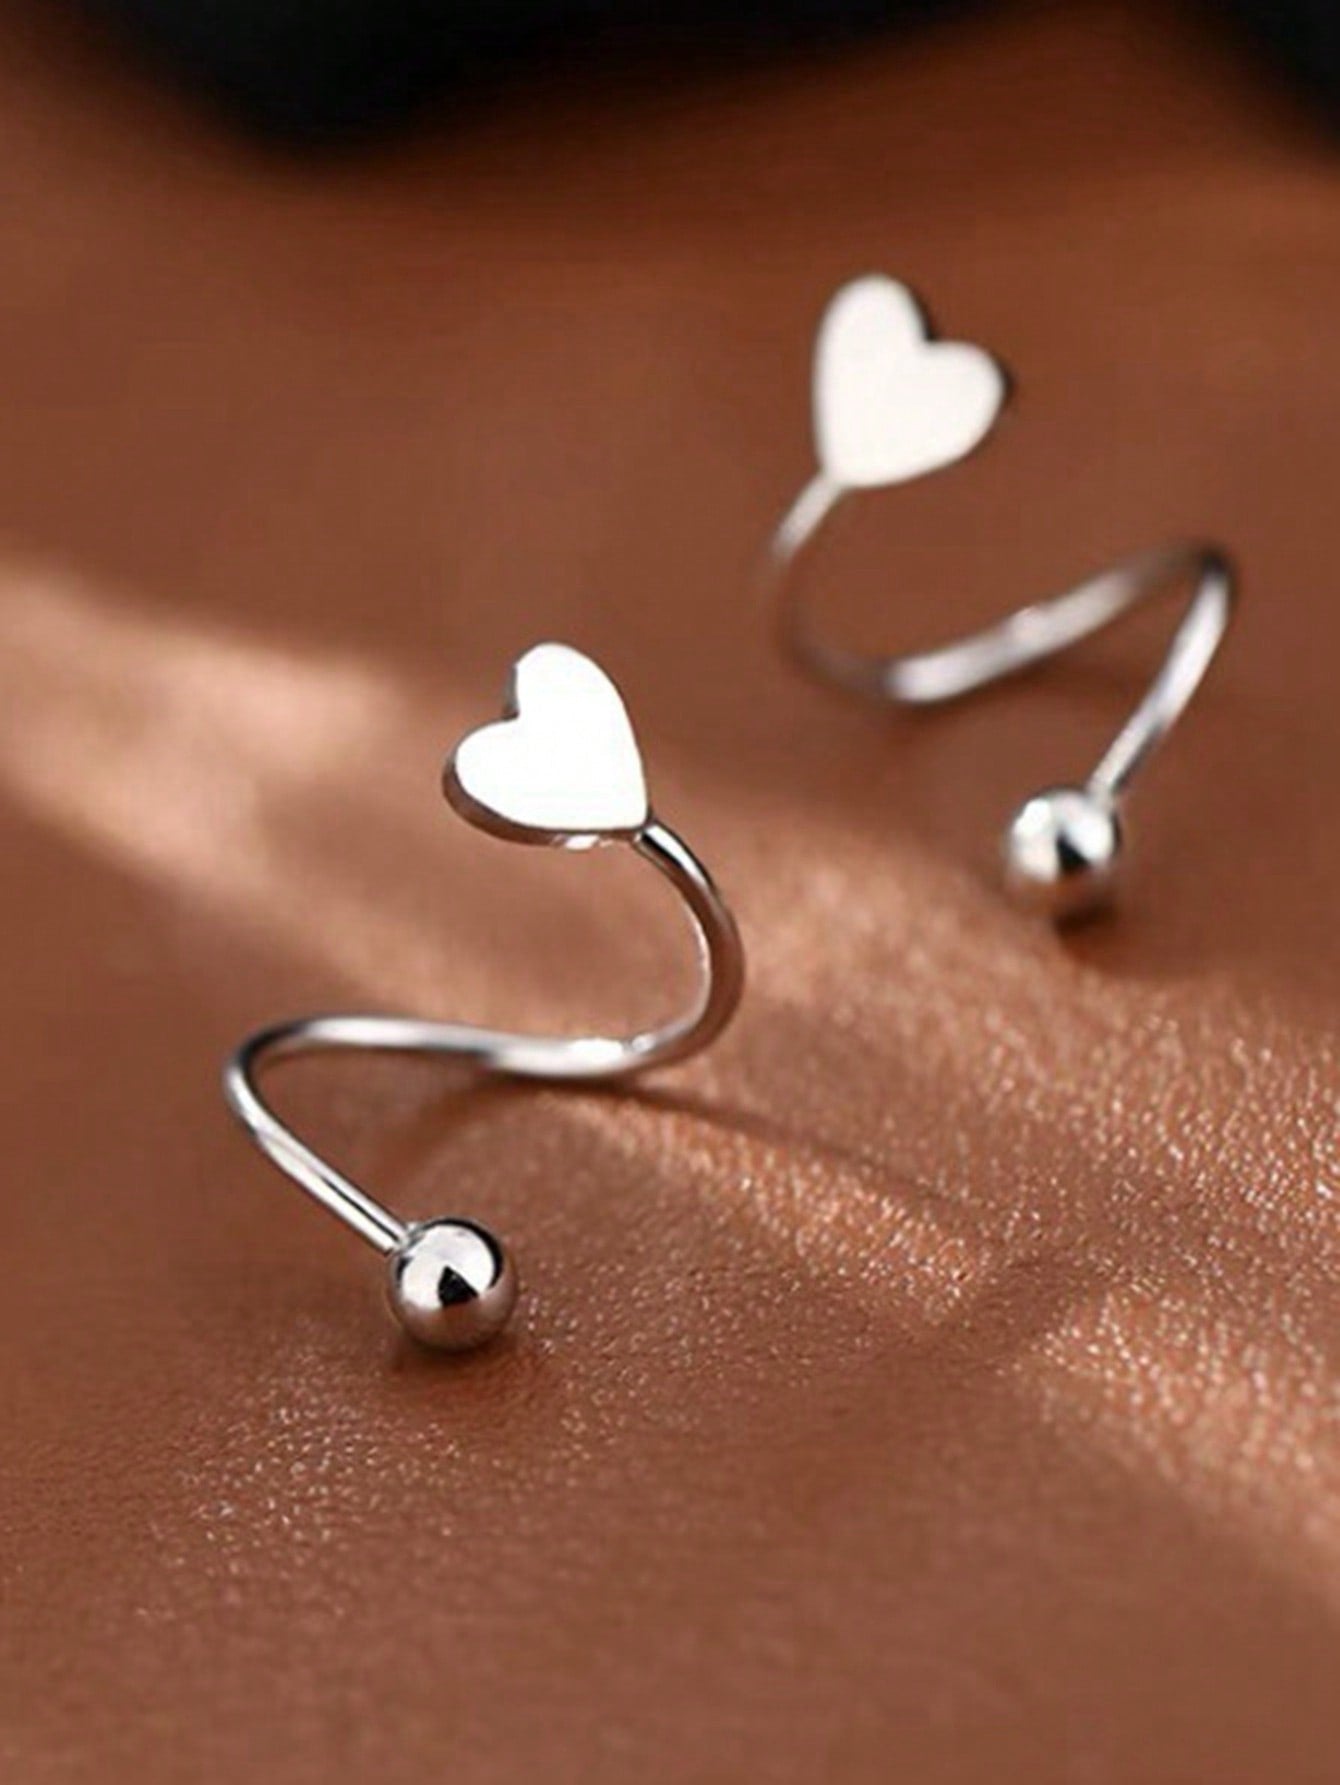 Pure Silver Spiral Heart Shaped Stud Earrings For Women Trendy versatile design Suitable For Sleep Party Wear Great Gift For Festival Daily Wear - La Veliere